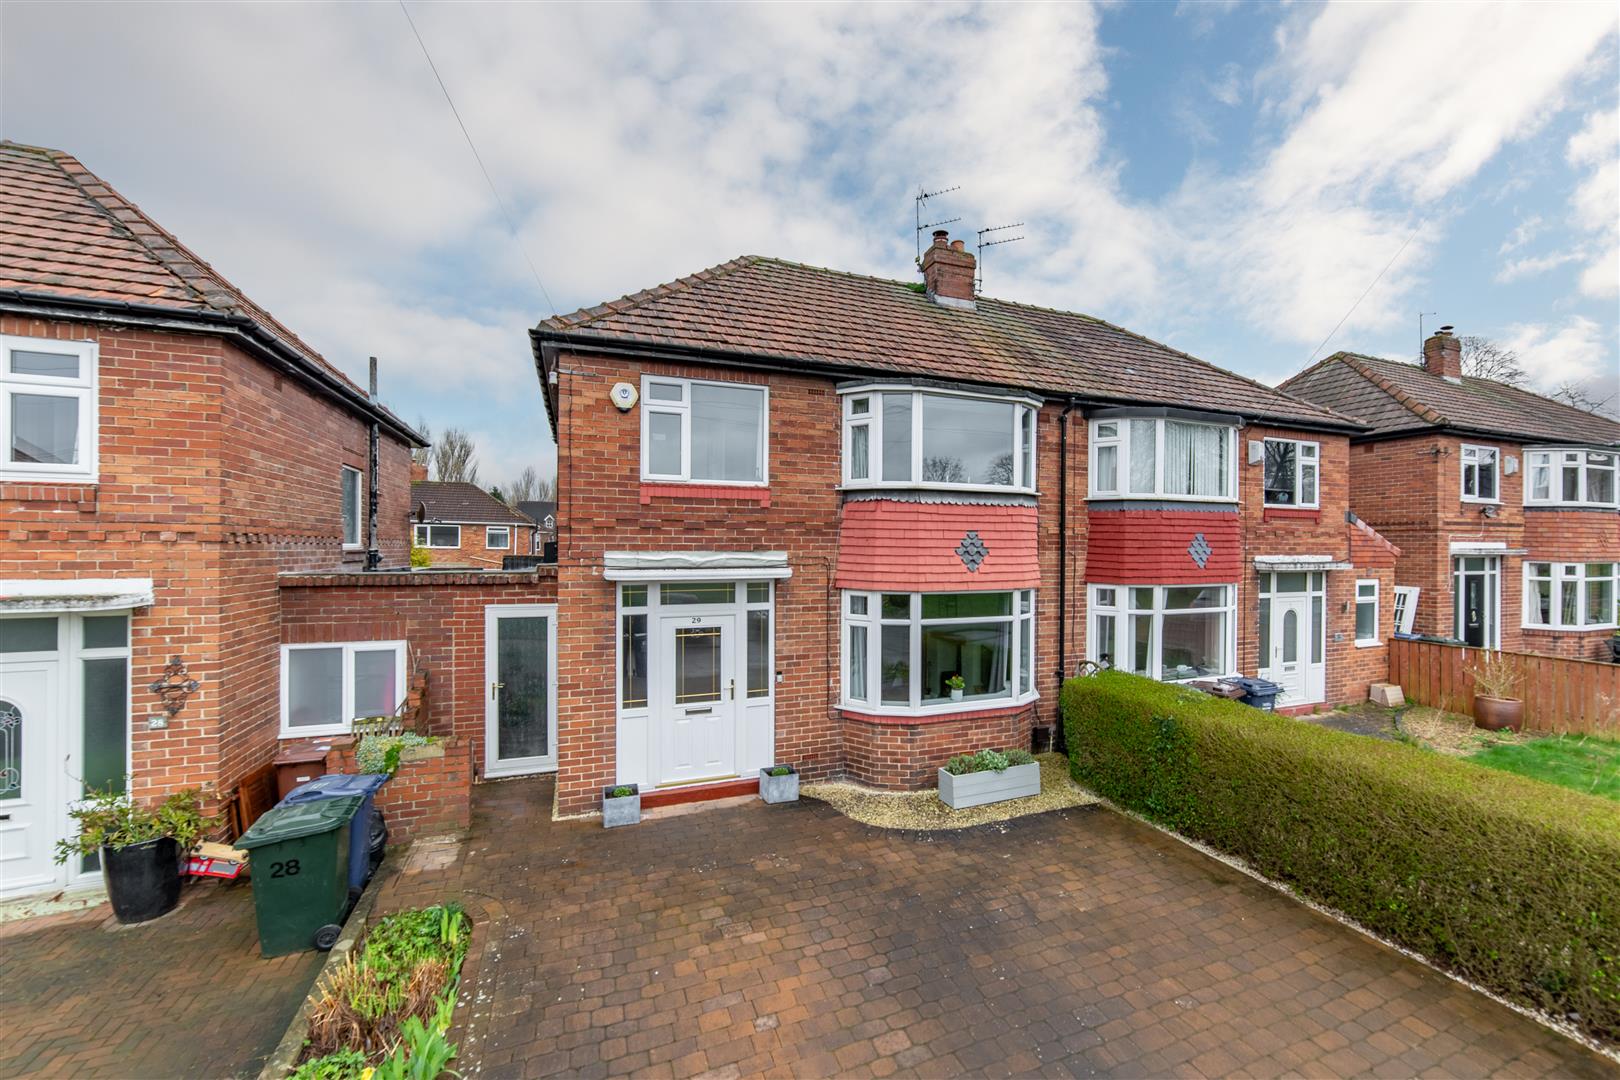 3 bed semi-detached house for sale in Berkeley Square, Newcastle Upon Tyne - Property Image 1